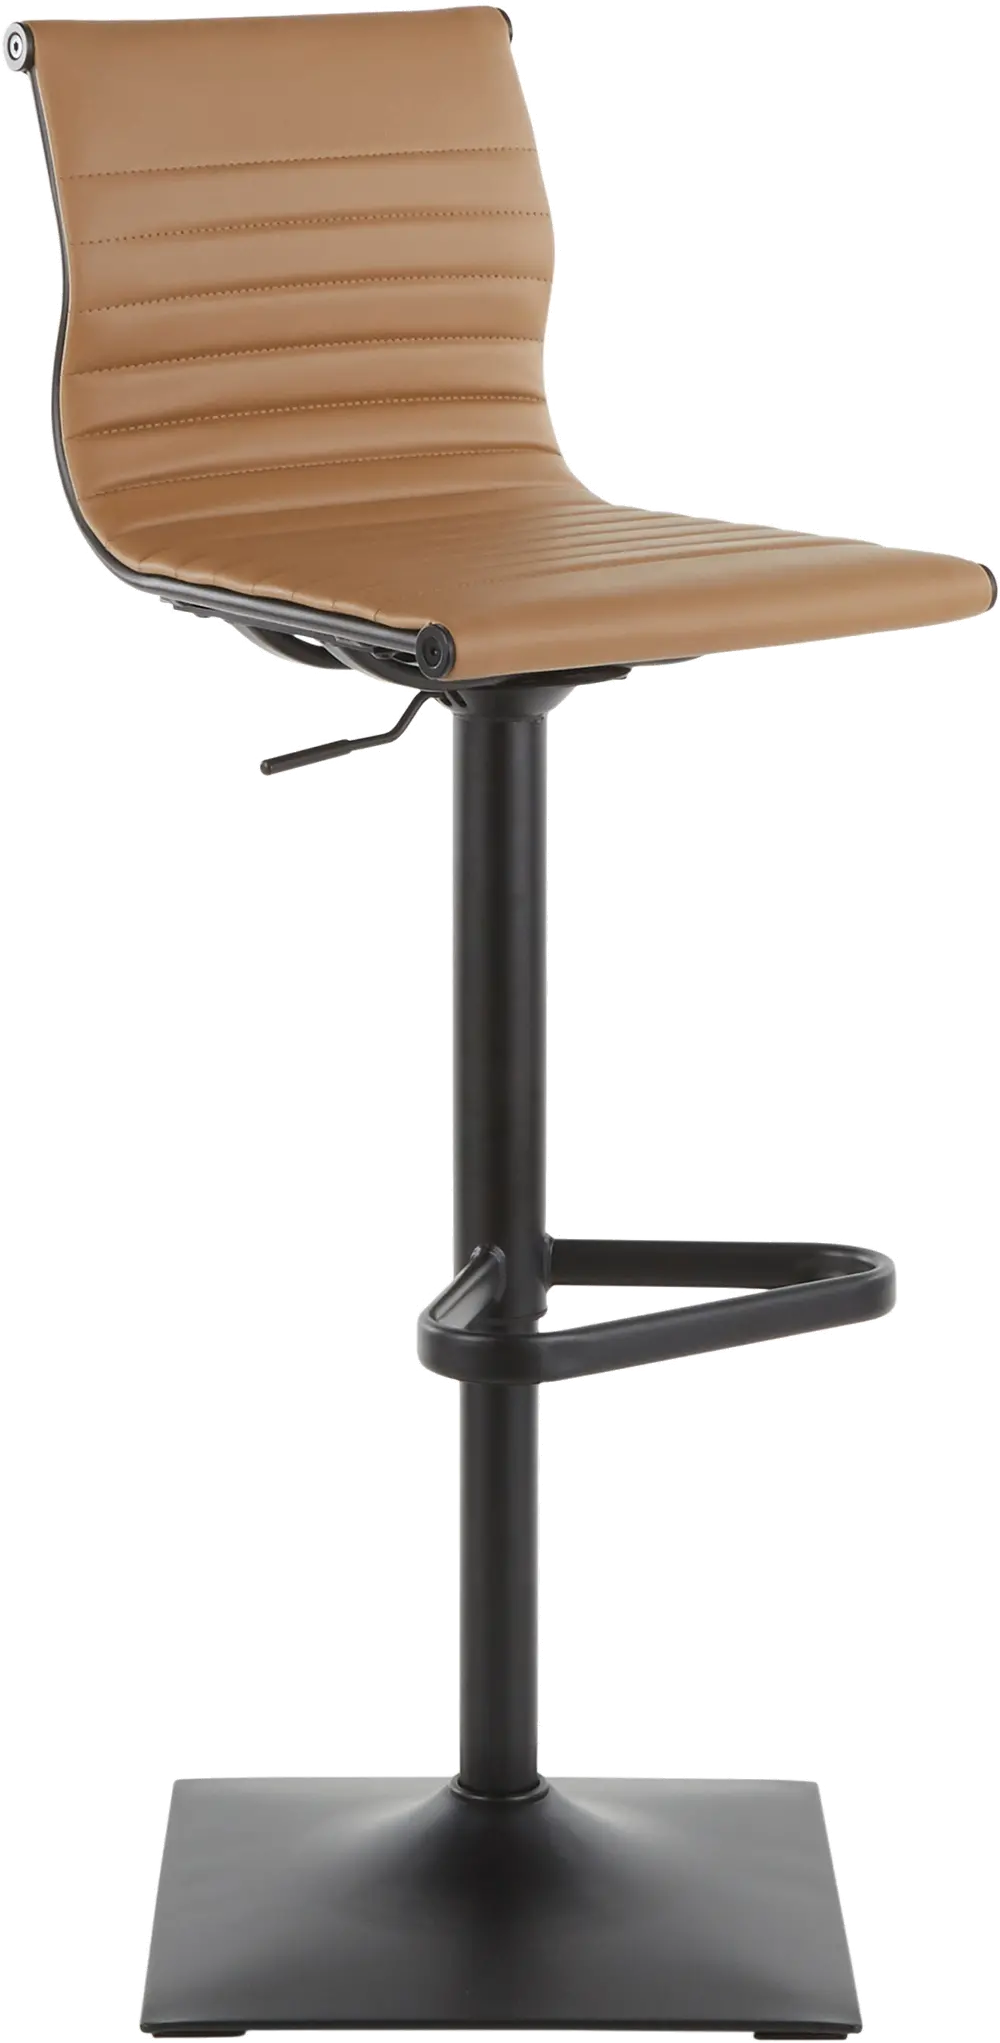 BS-MASTER BKCAM Contemporary Black and Camel Brown Adjustable Swivel Bar Stool - Masters-1